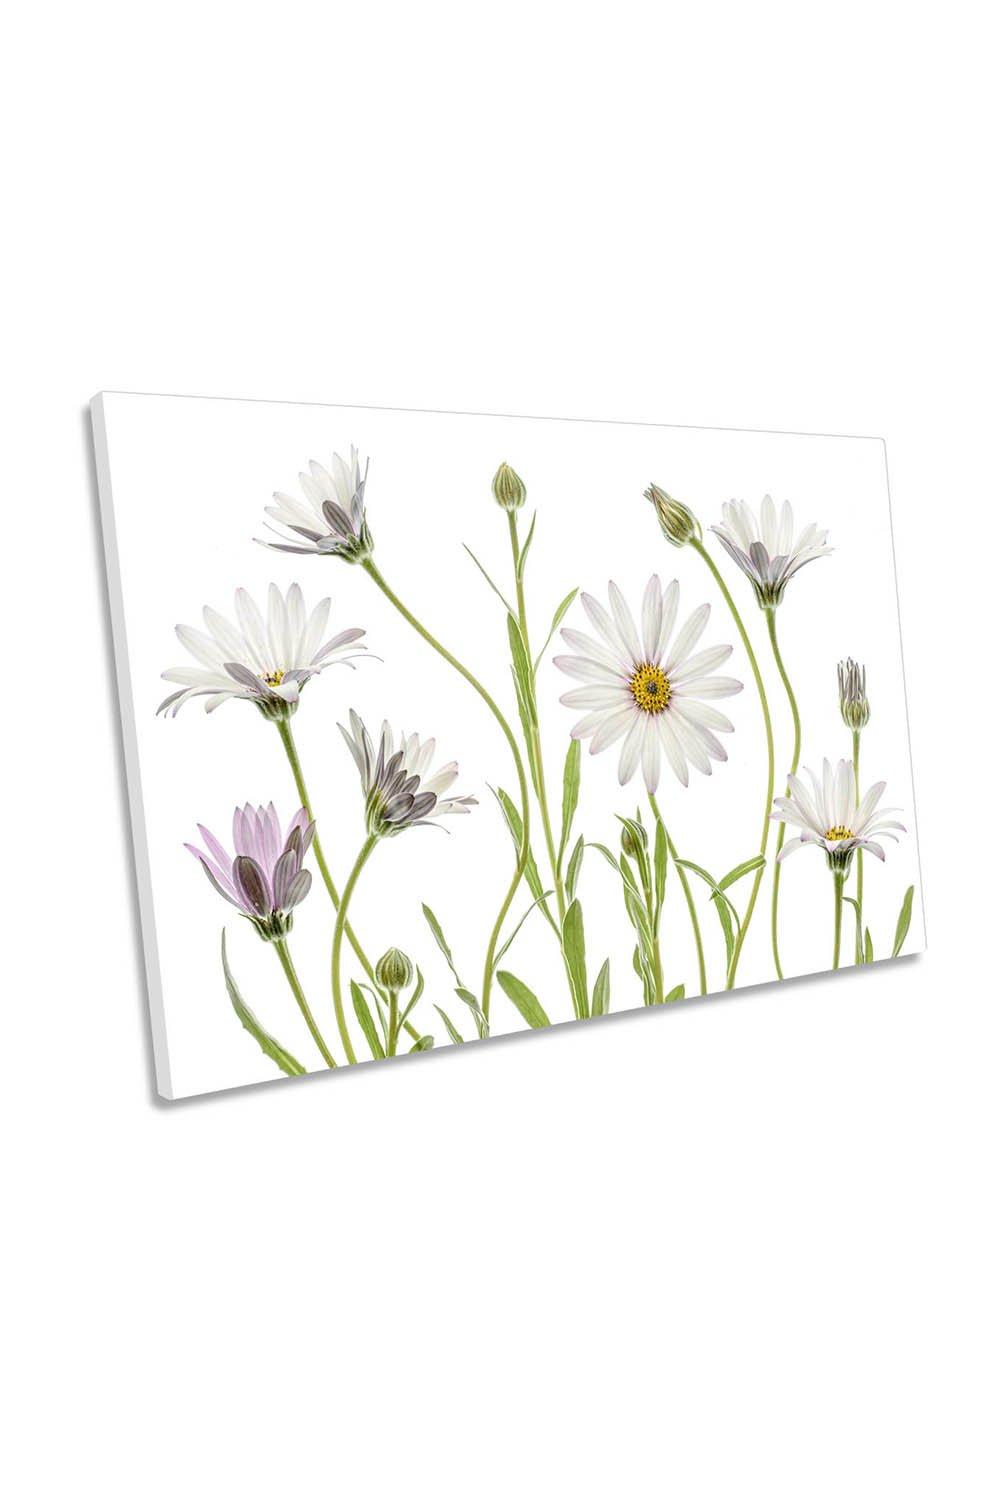 Cape Daisy Flowers Floral White Canvas Wall Art Picture Print